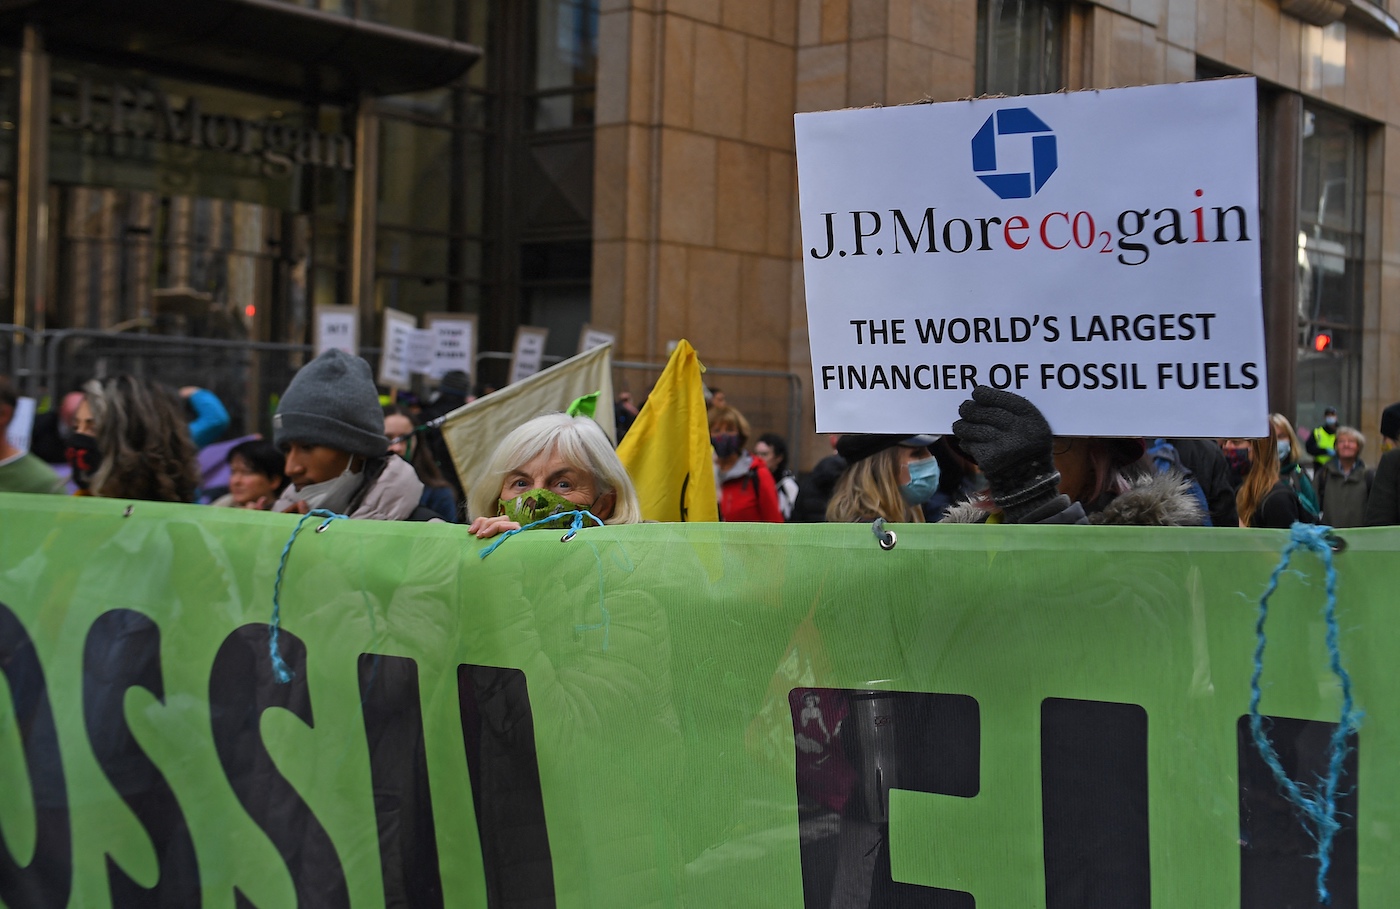 Protestors outside of the JP Morgan Chase building in glasgow. A sign reads "the world's largest financier of fossil fuels."